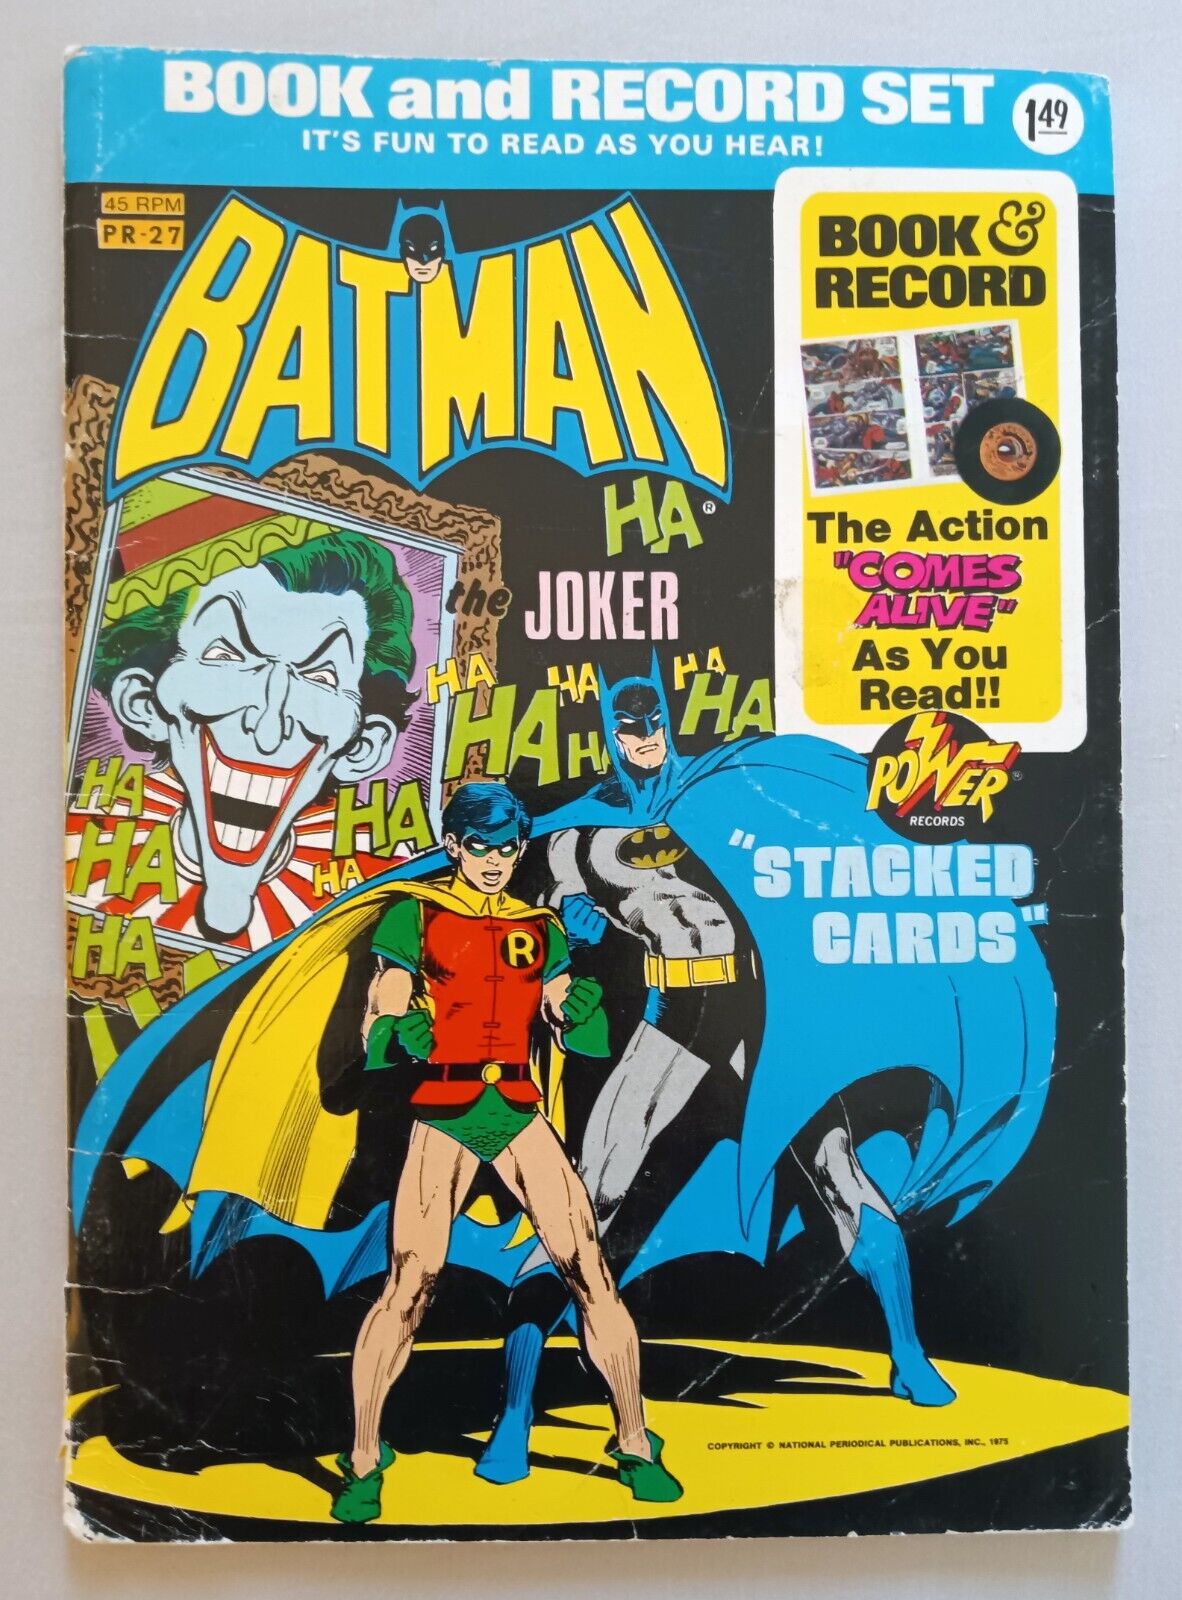 BATMAN, STACKED CARDS BOOK AND RECORD SET, POWER RECORDS, DC, BRONZE, 1975, PR27